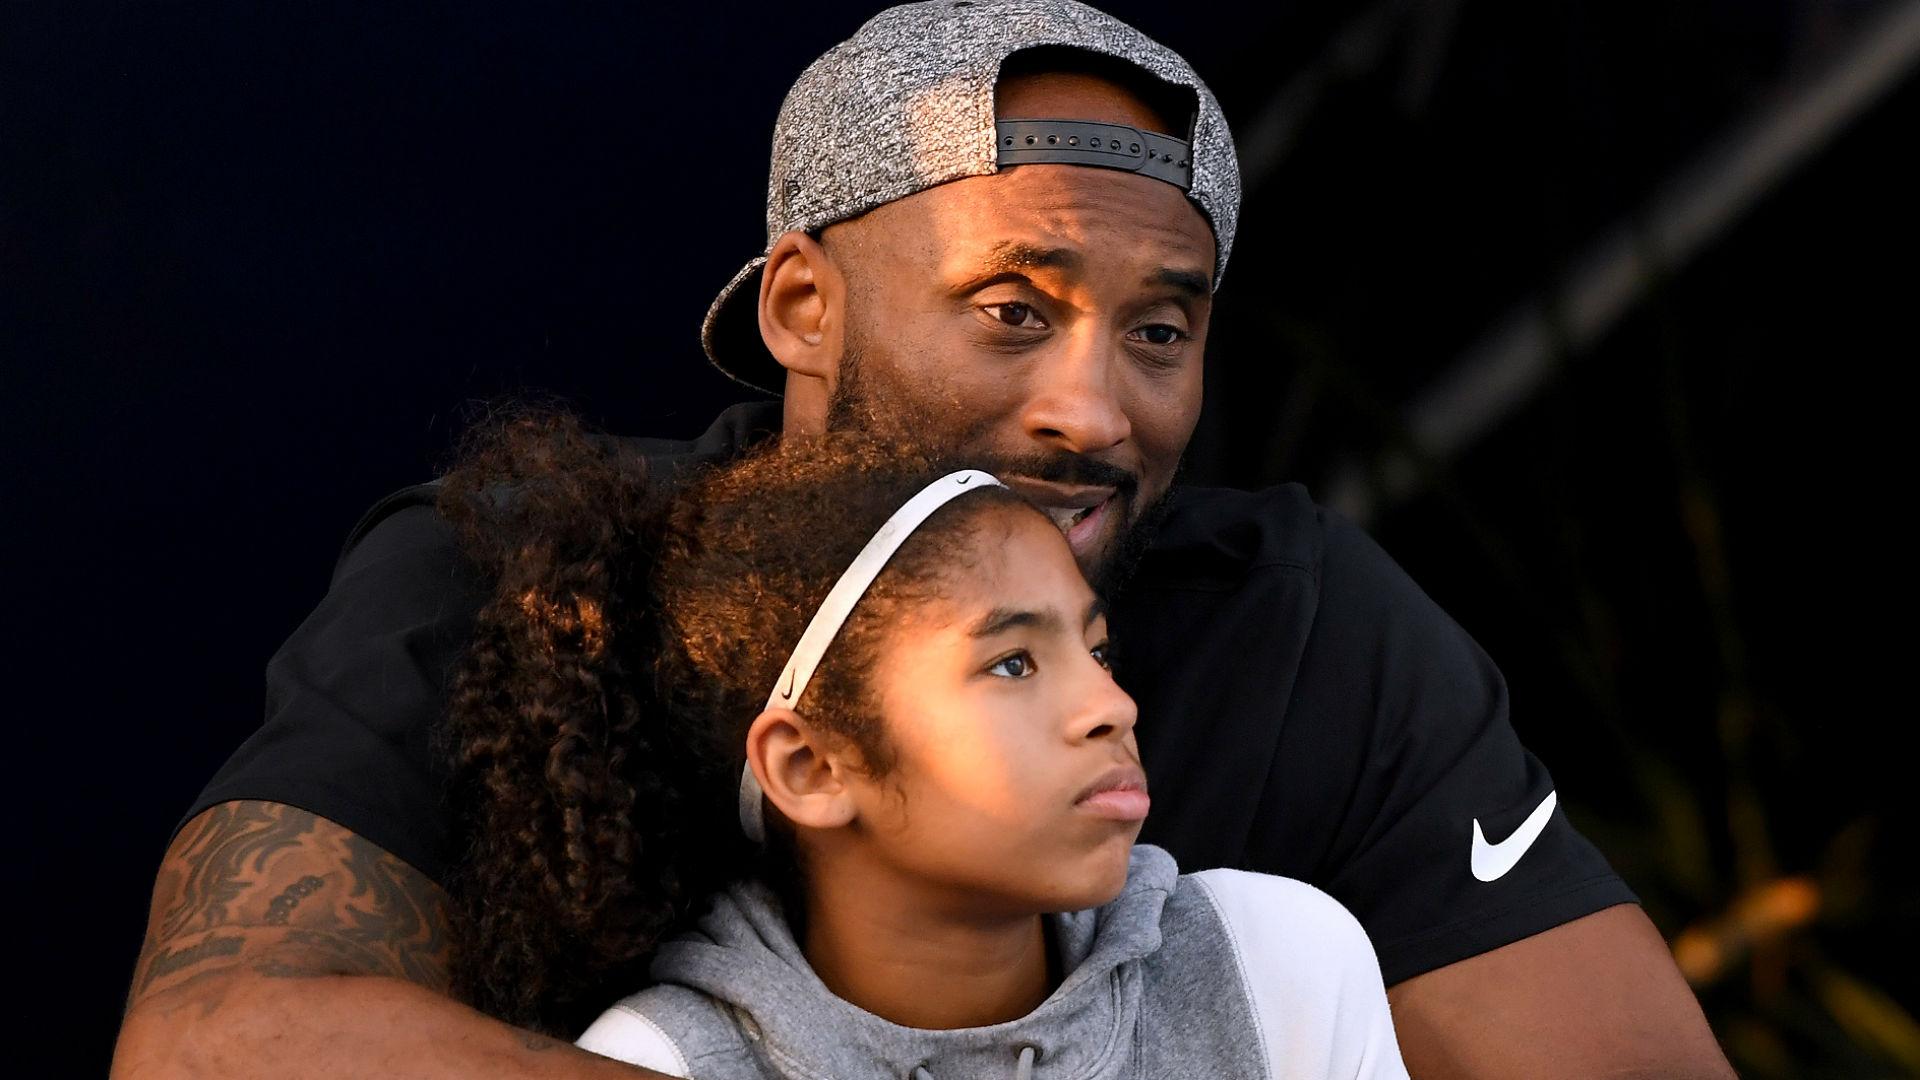 Kobe Bryant's daughter Gianna hoped to carry on NBA legend's basketball legacy